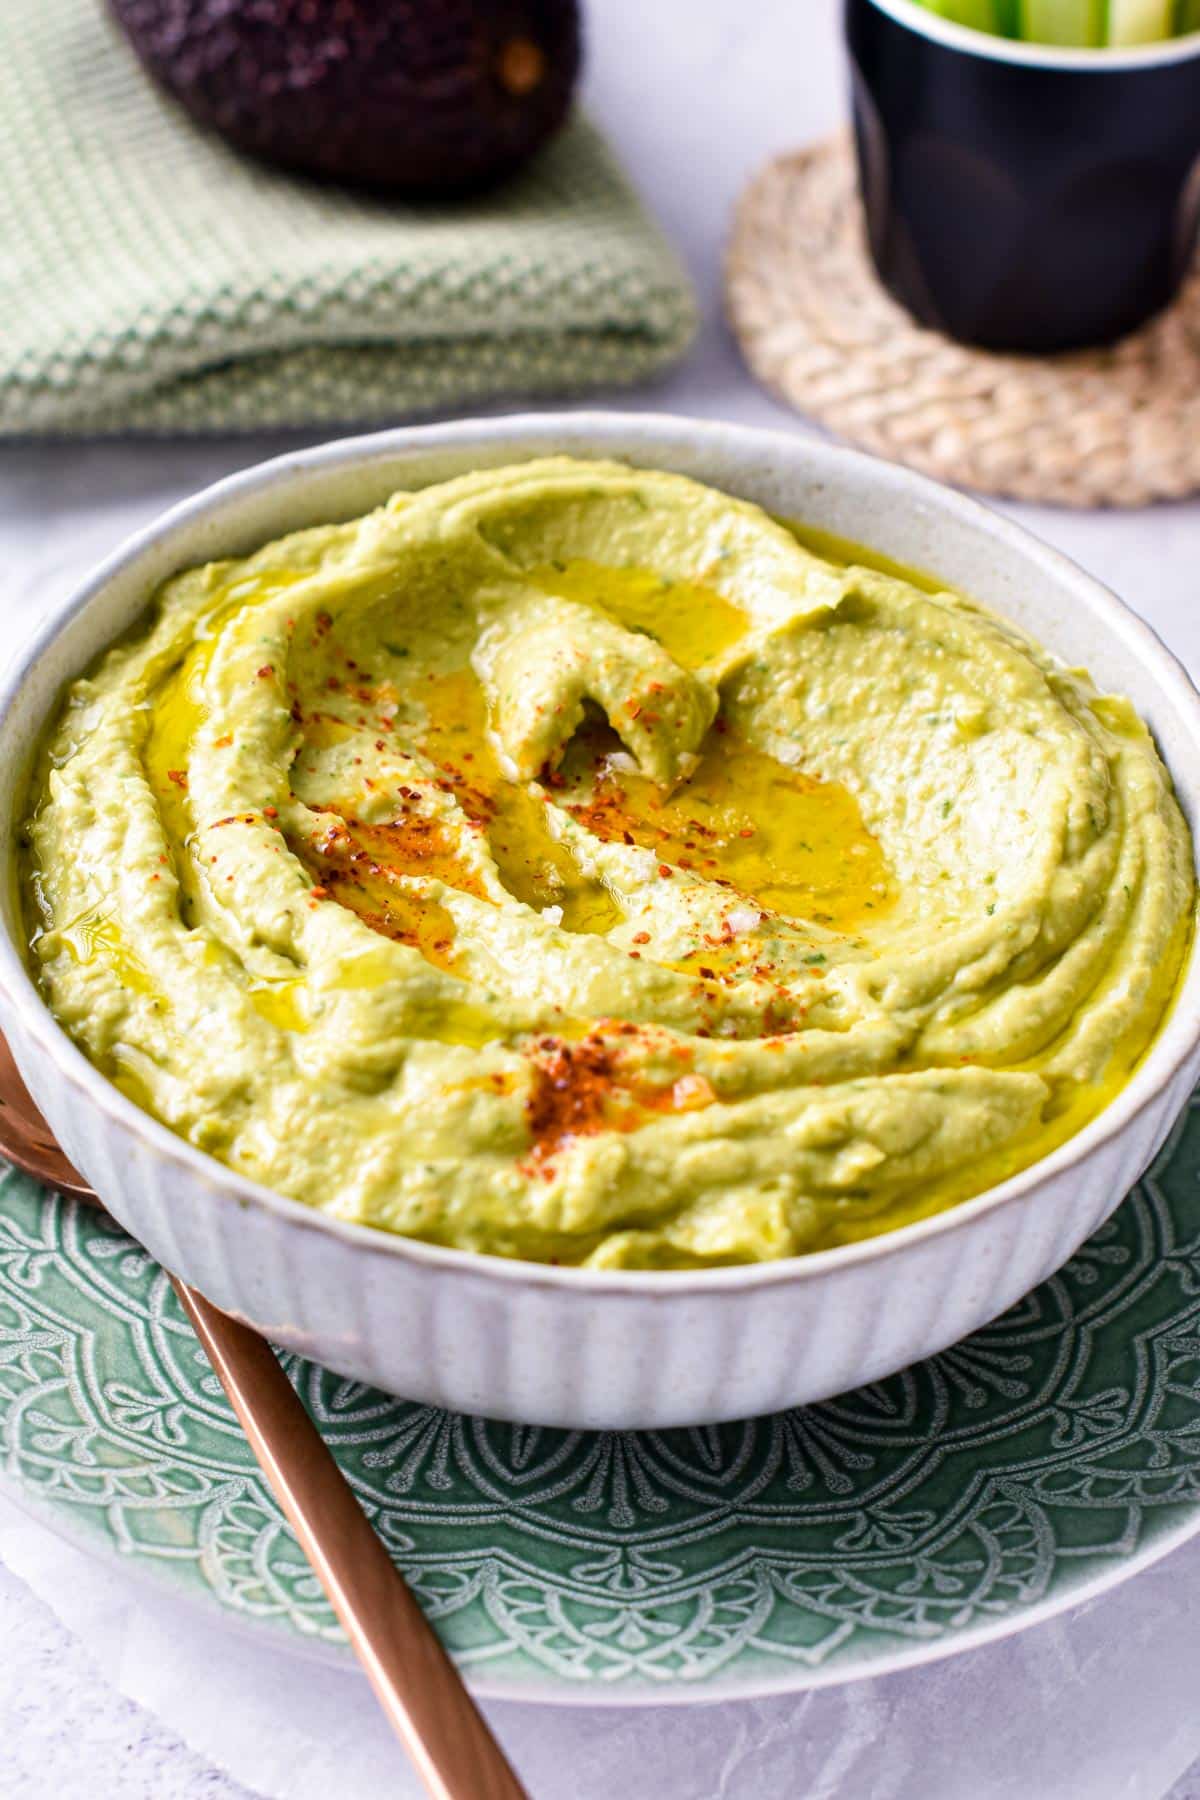 This Avocado Hummus is a creamy green hummus packed with avocado for a boost of healthy fats and ultra creamy texture. Plus, this easy hummus recipe is also vegan, gluten-free and dairy-free so everyone can dip in.